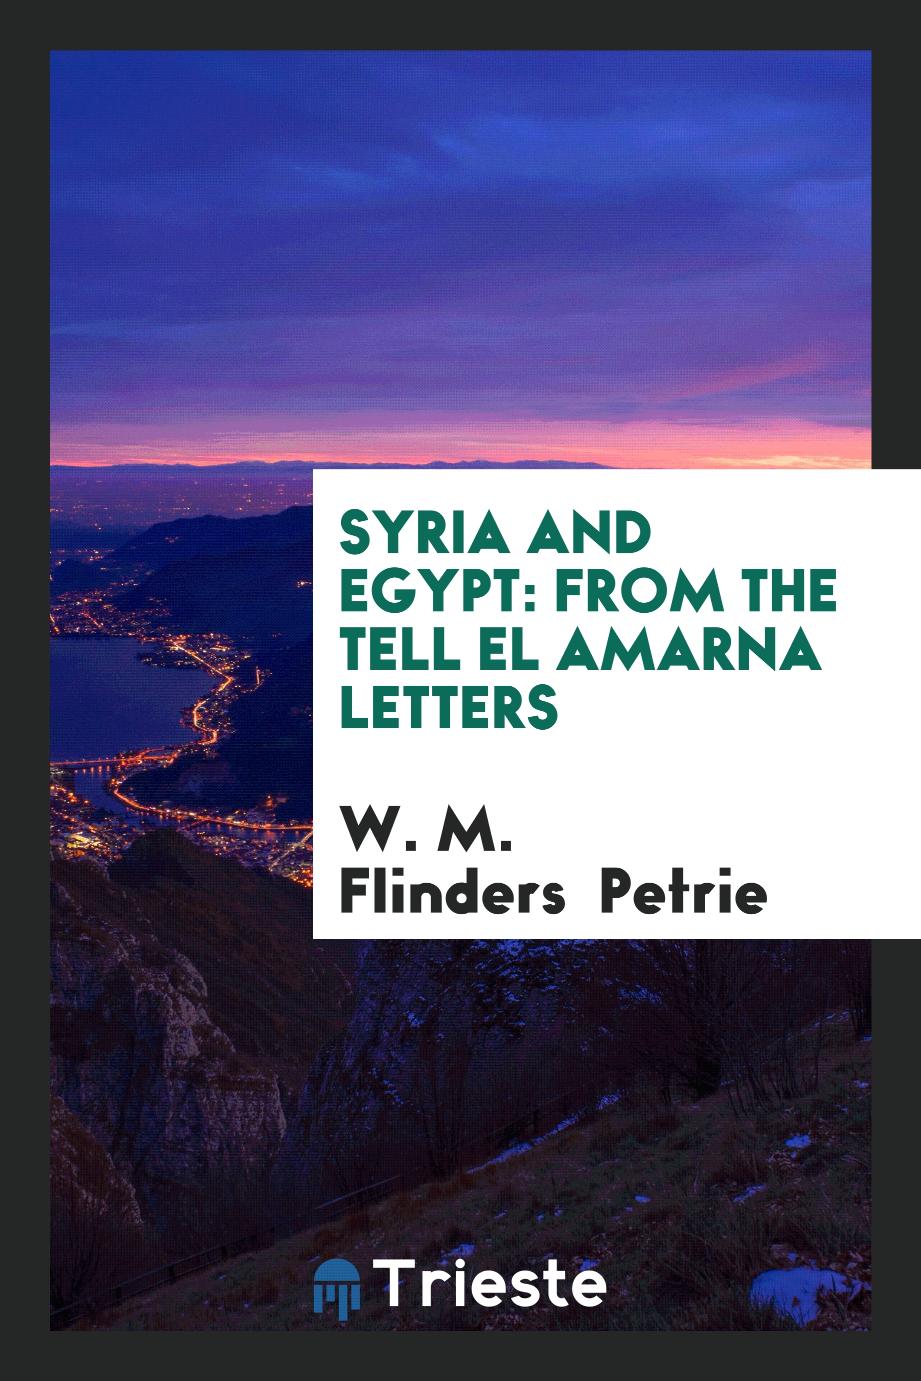 Syria and Egypt: From the Tell El Amarna Letters